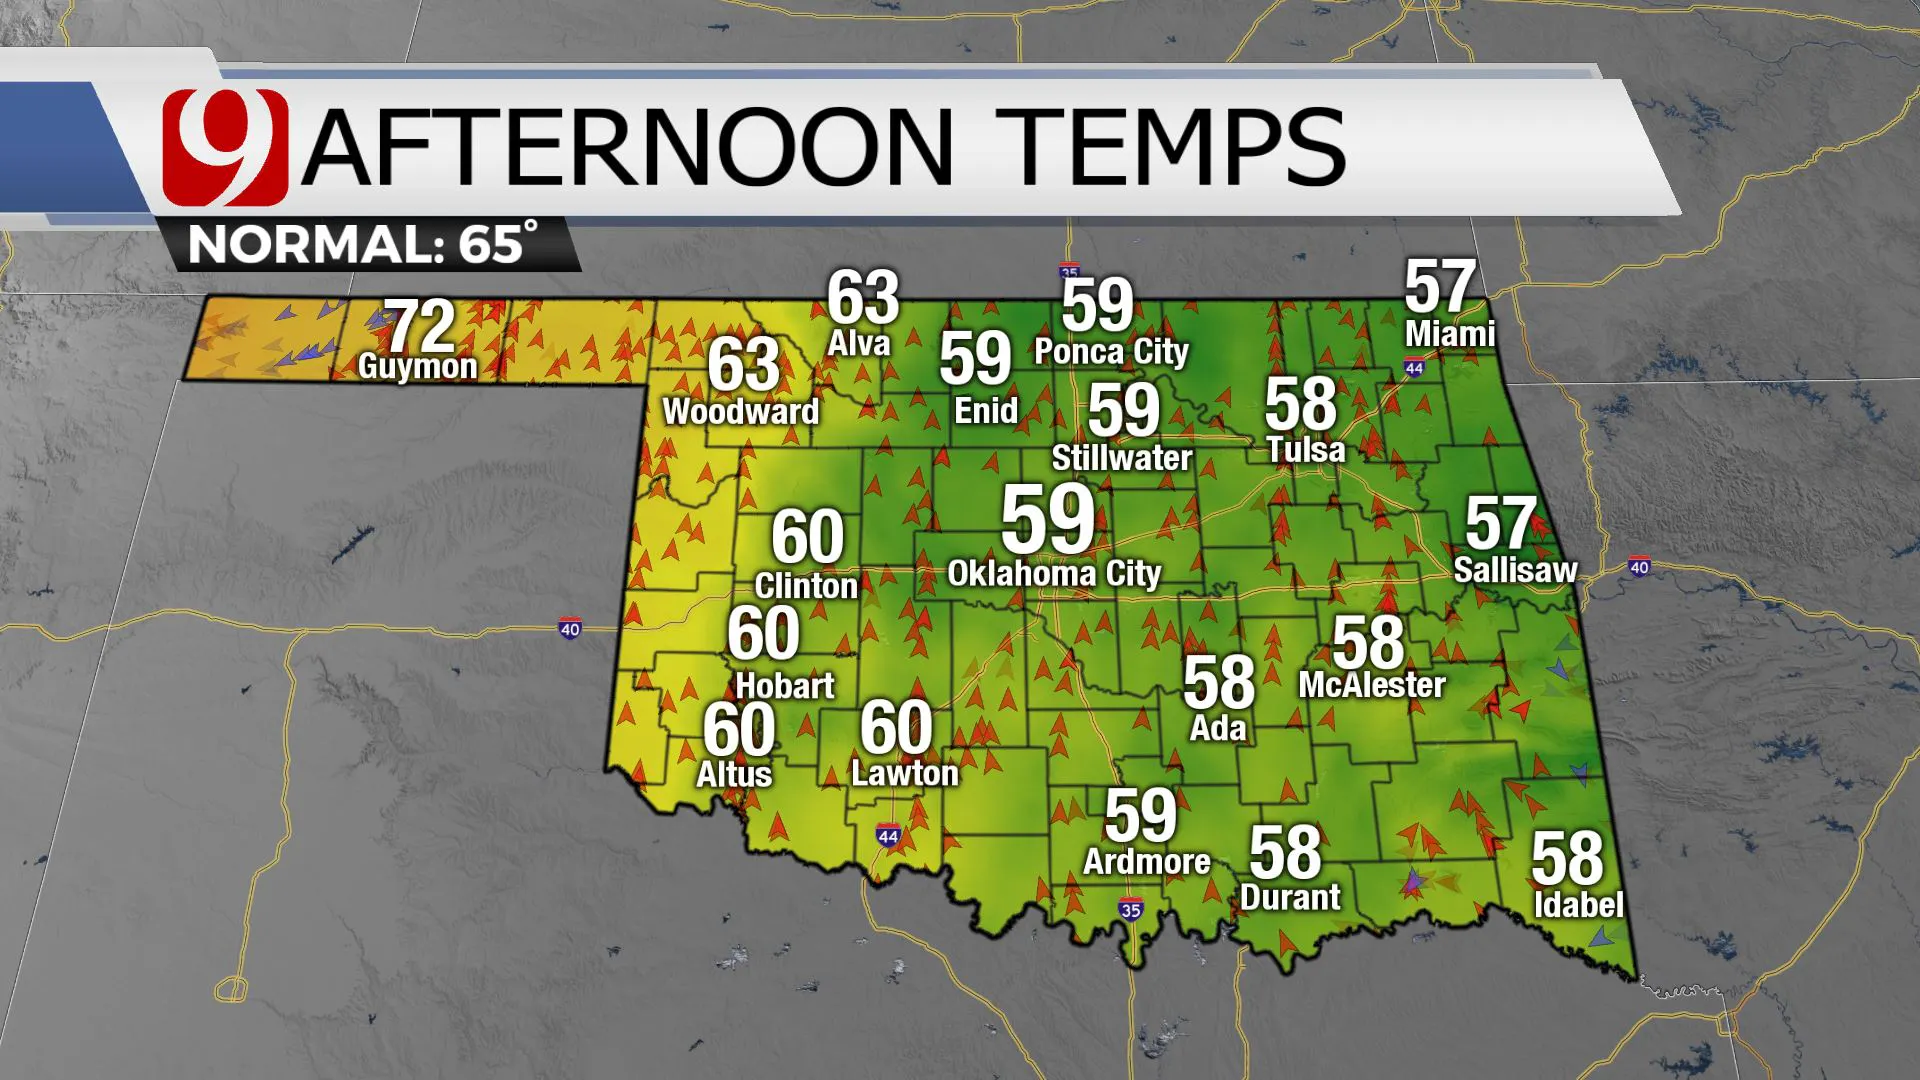 Afternoon Temps